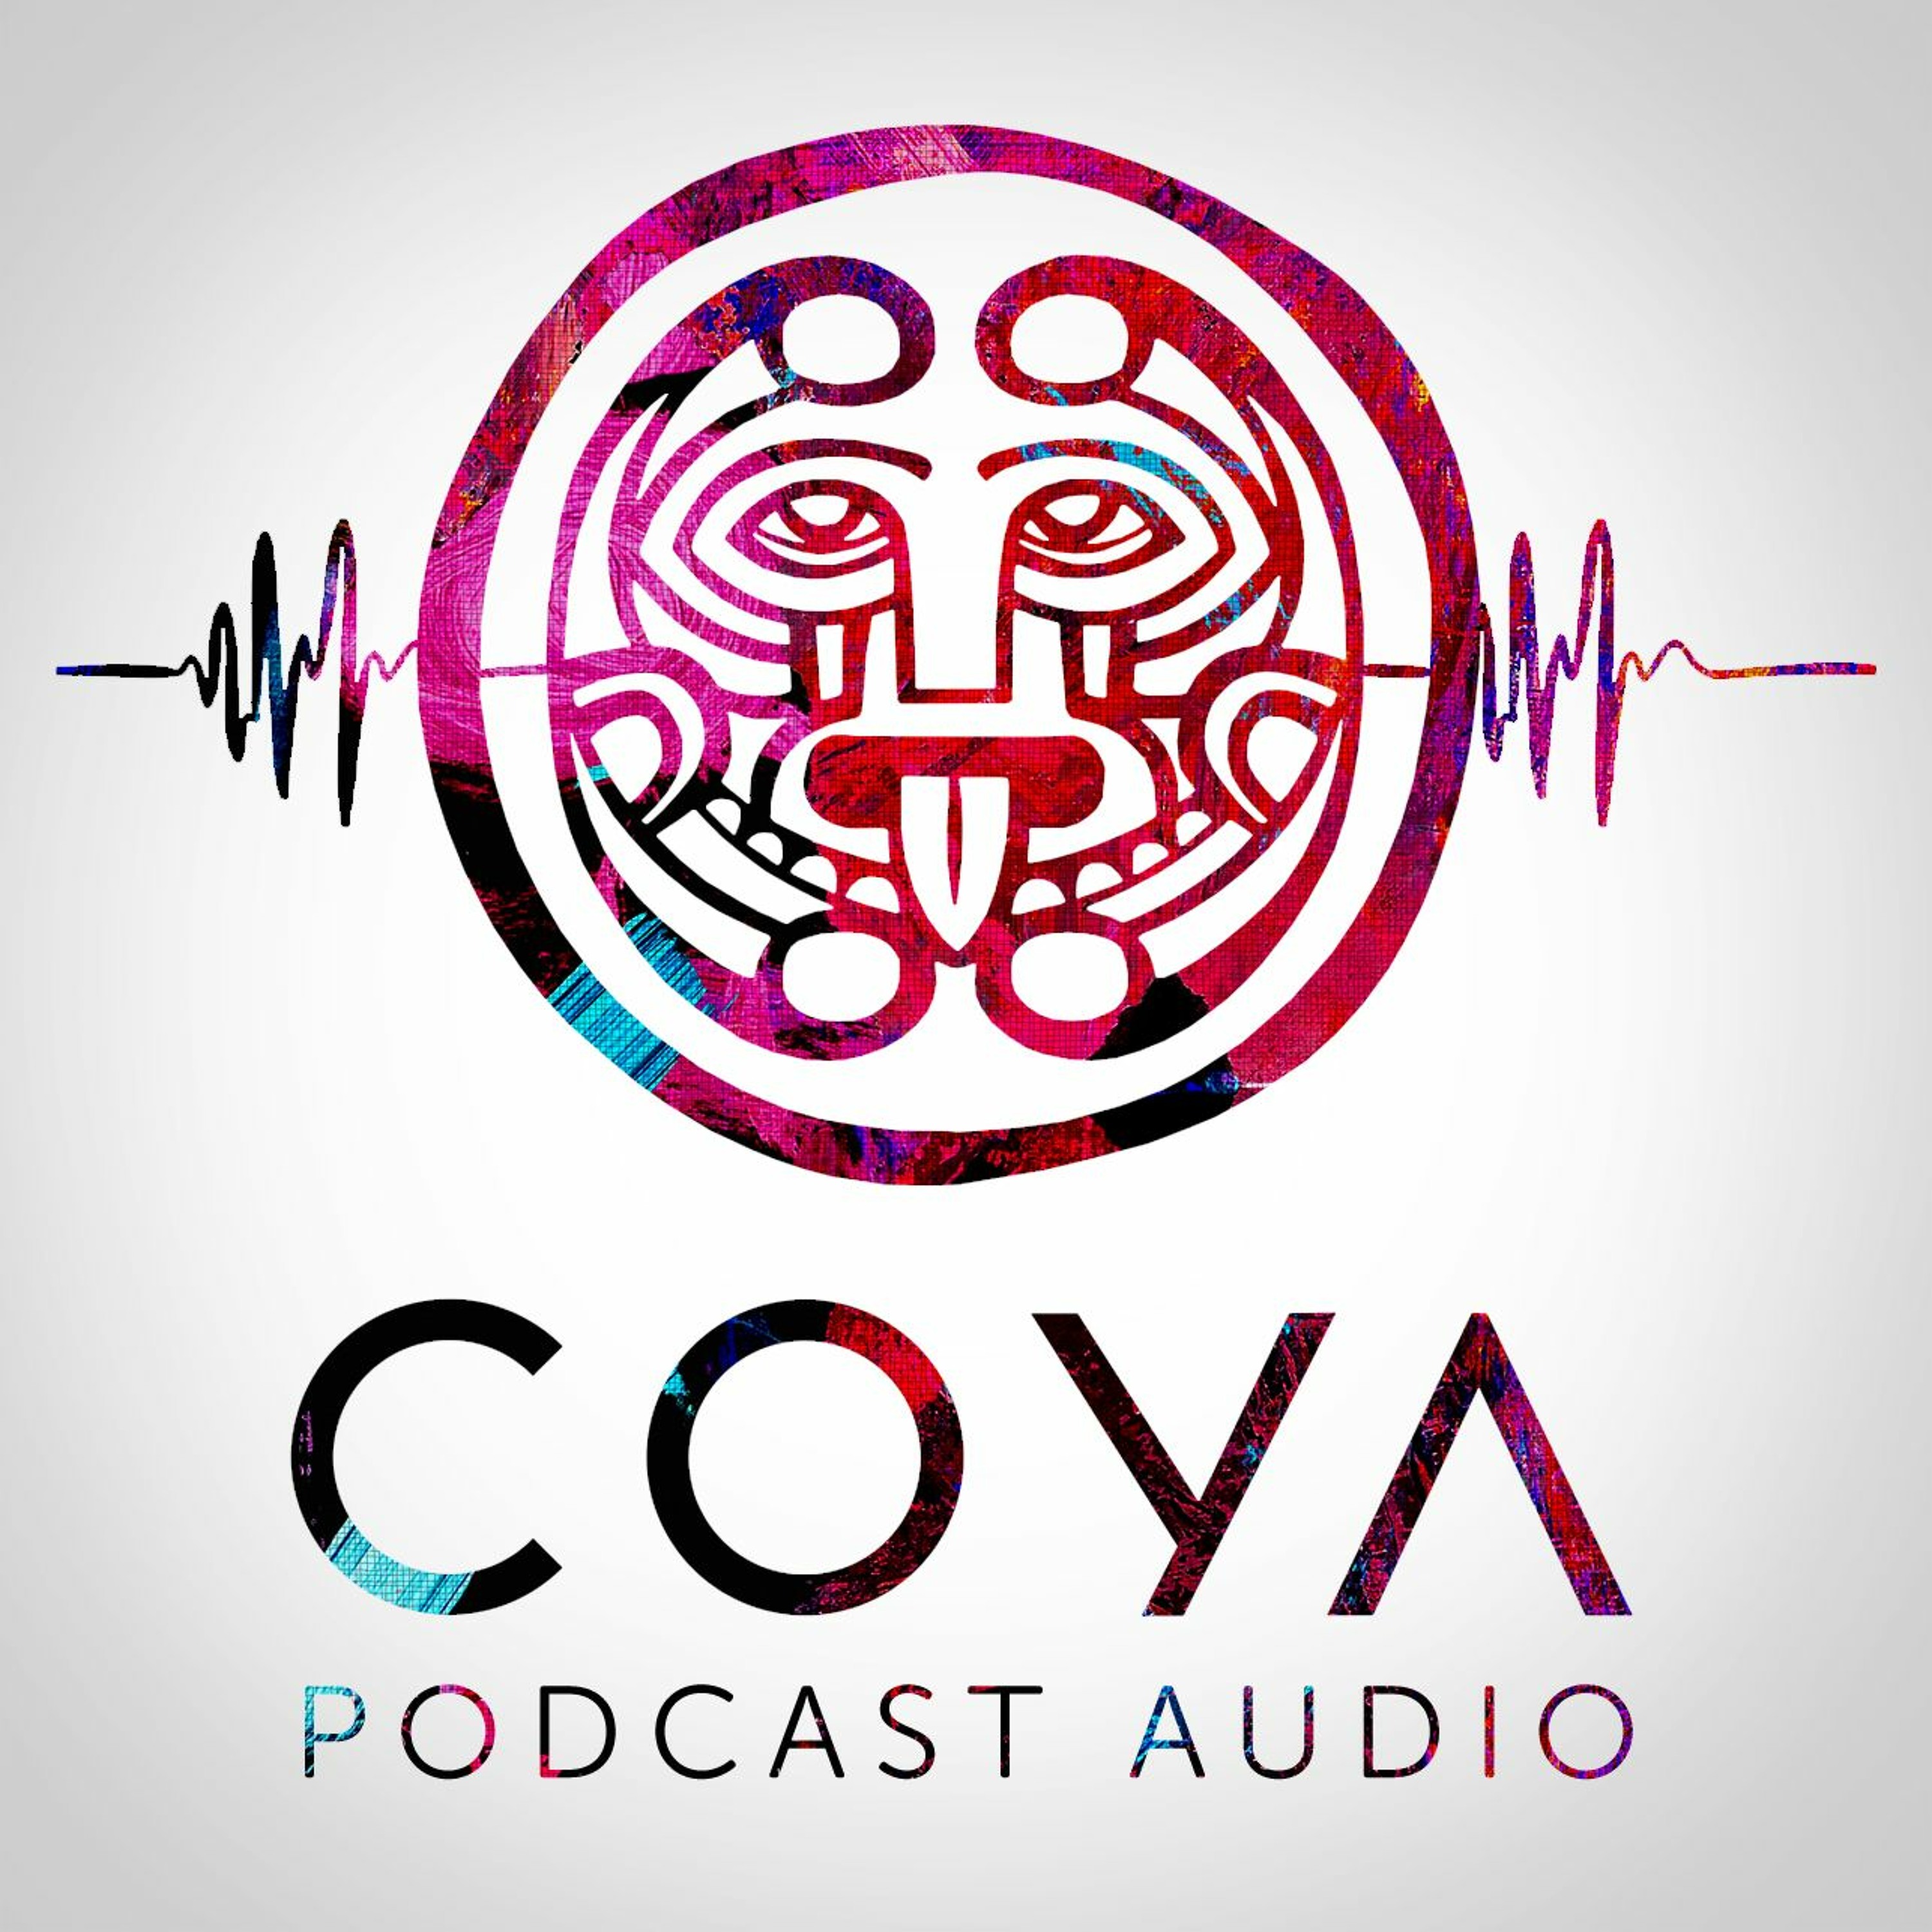 COYA Music Presents Podcast #38 by Sparrow & Barbossa - Special Guest